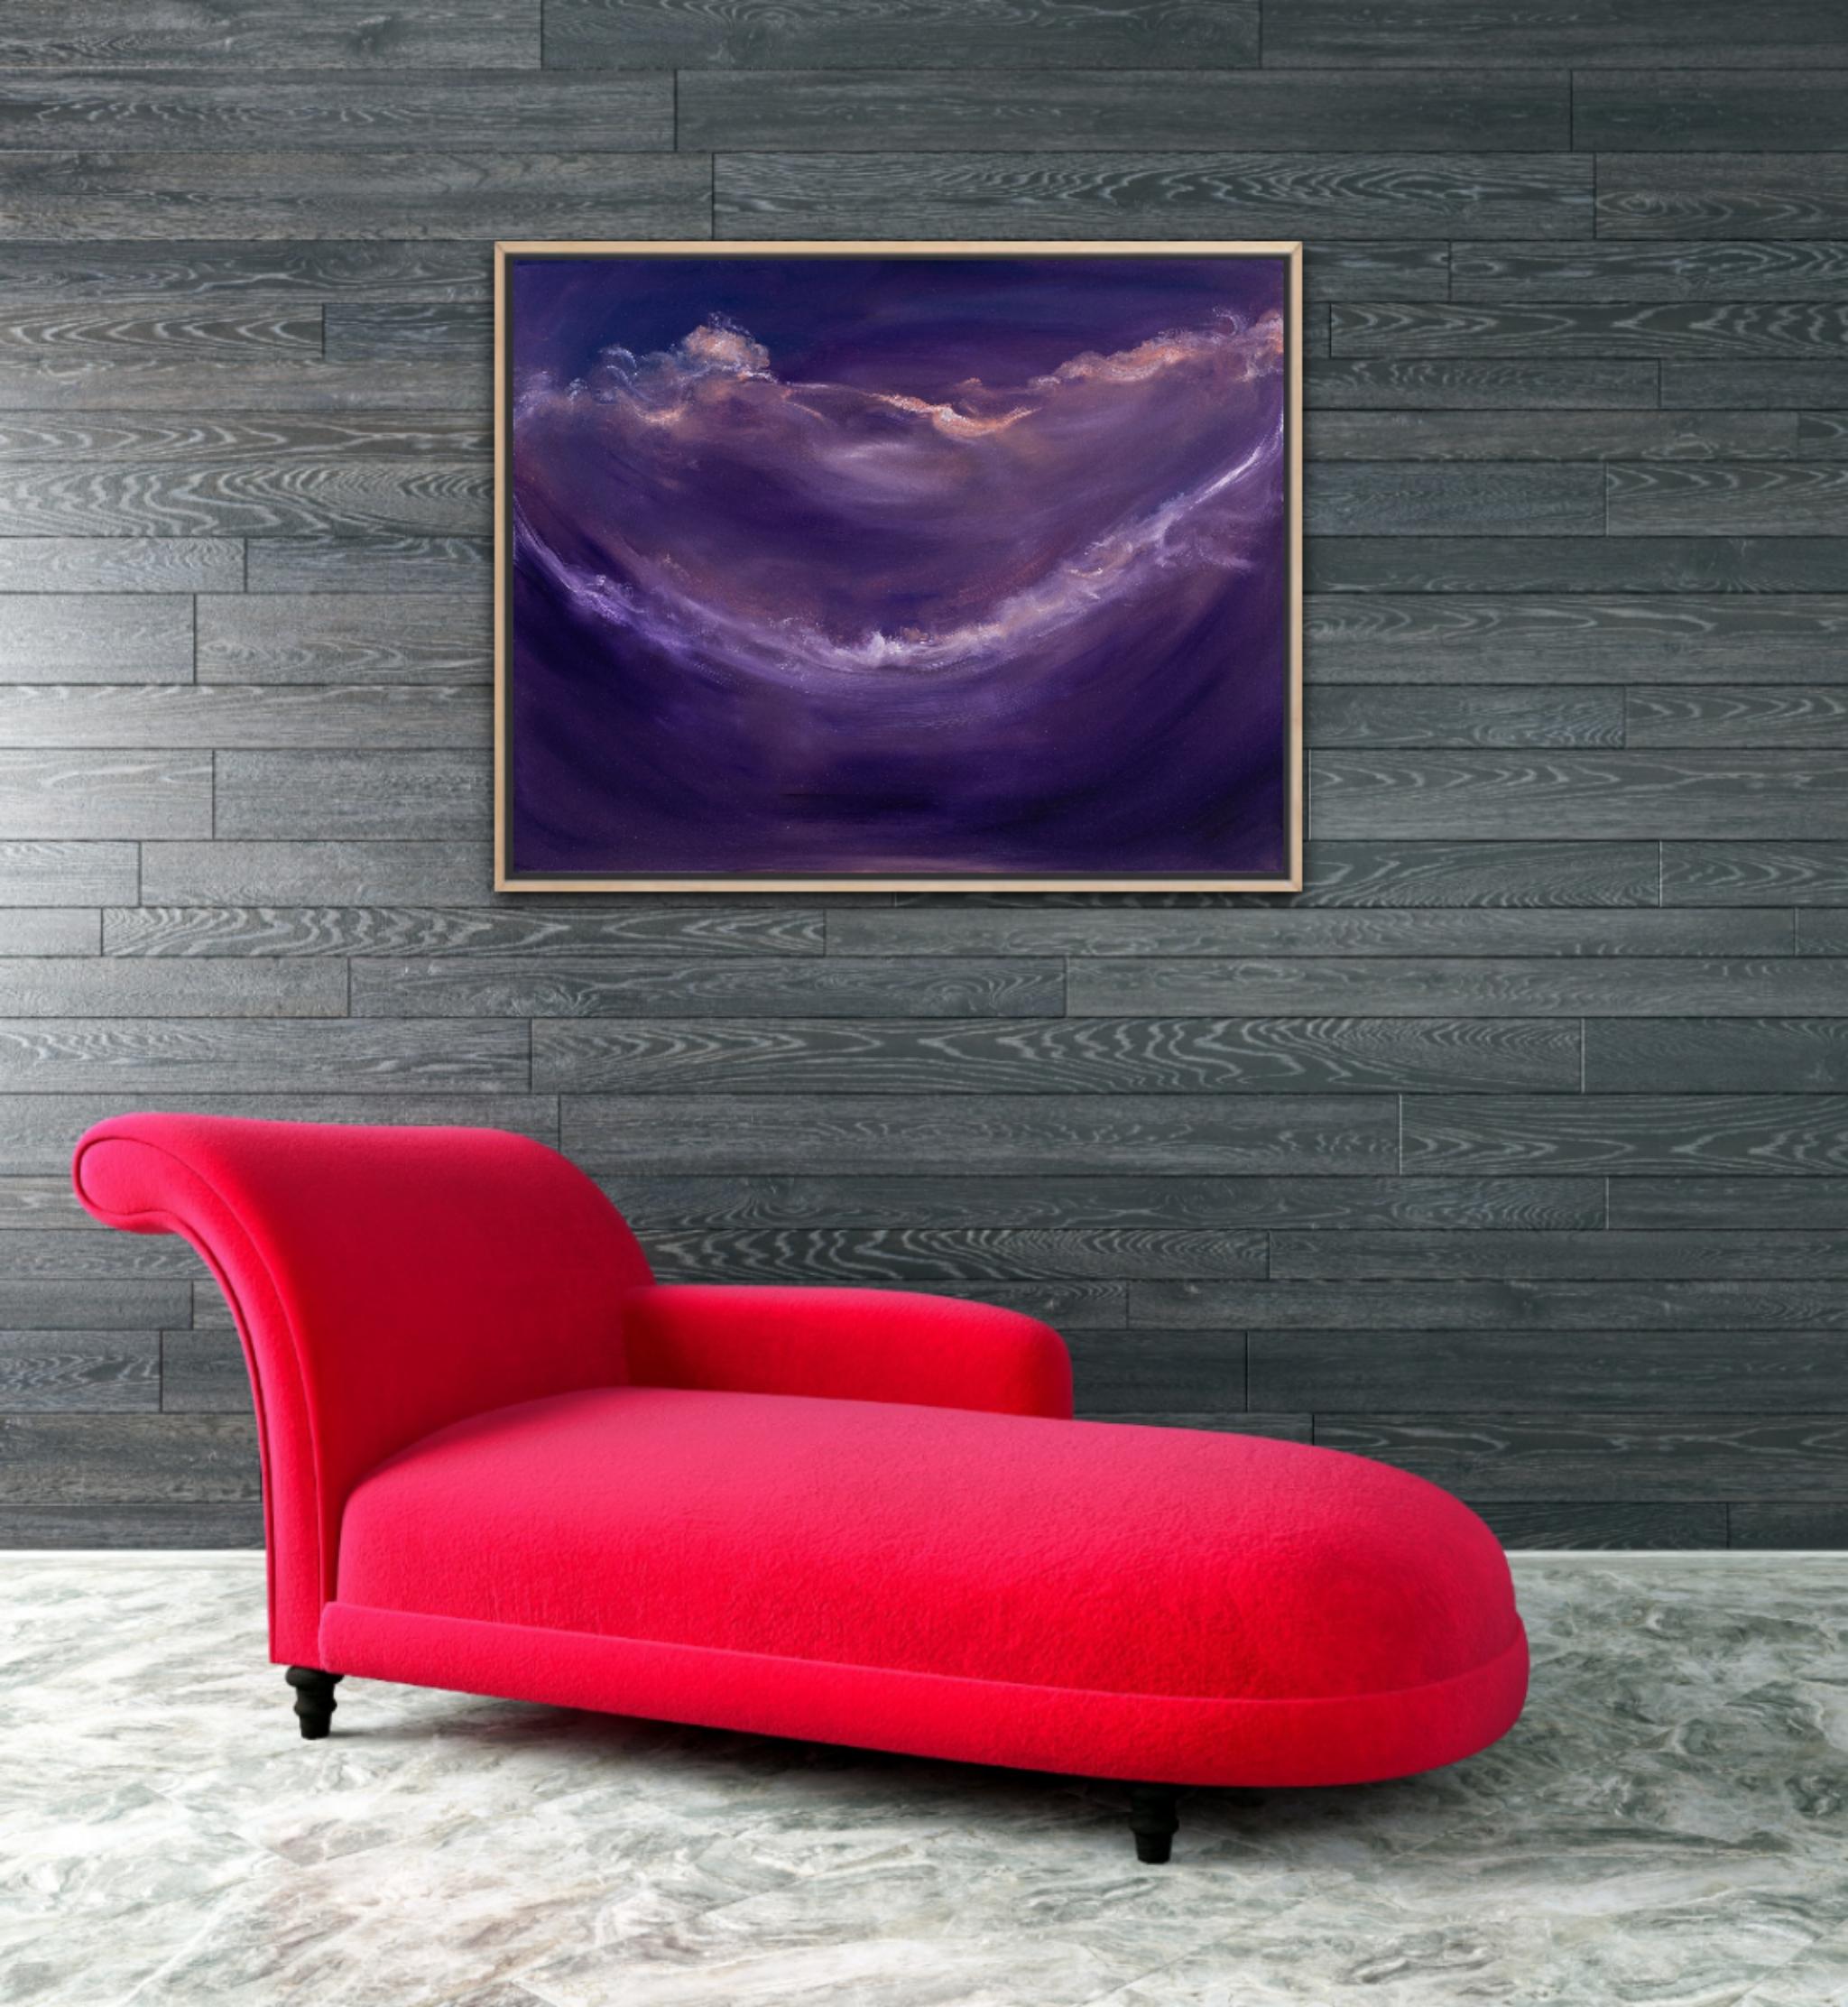 Deep space rhapsody - Abstract purple night sky painting For Sale 9